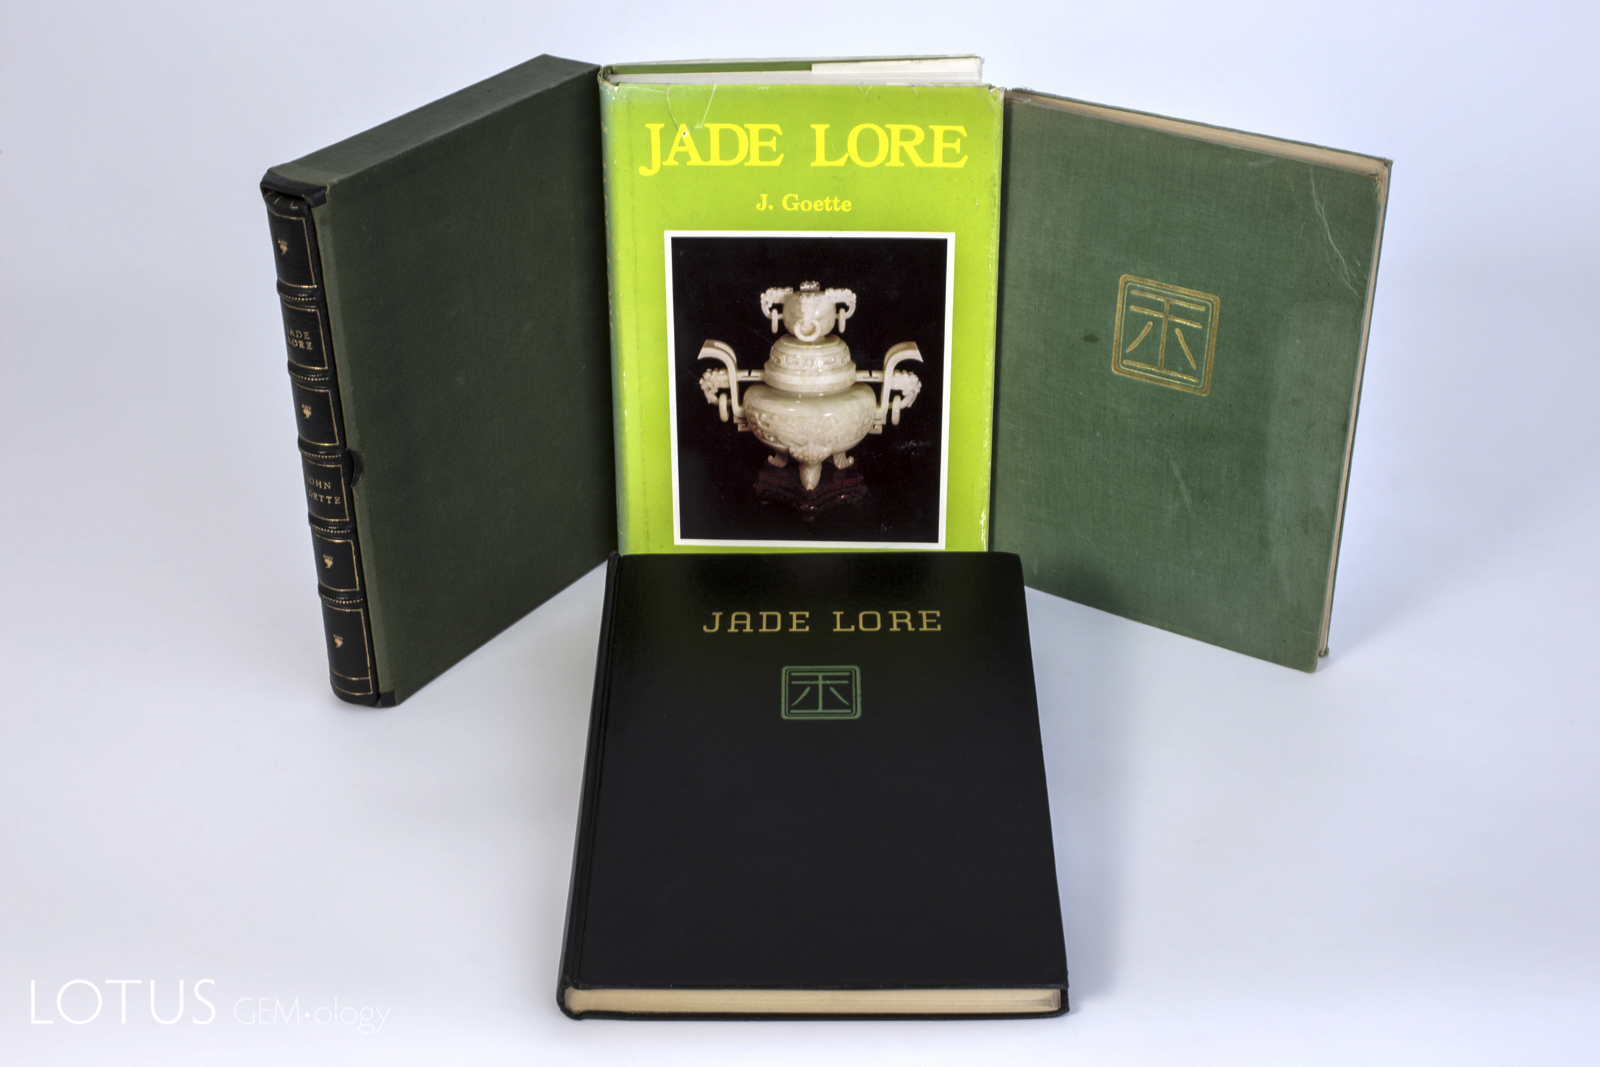 One of the joys of book collecting is collecting different editions and printings. Here we see four versions of John Goette's Jade Lore. Clockwise from top left: custom leather binding of the 1936 Shanghai edition; the 1976 Ars Ceramica edition; the original 1936 edition and the 1937 Reynal & Hitchcock edition. Prior to the appearance of this book in 1936, only nine monographs on jade had been published in Occidental languages.